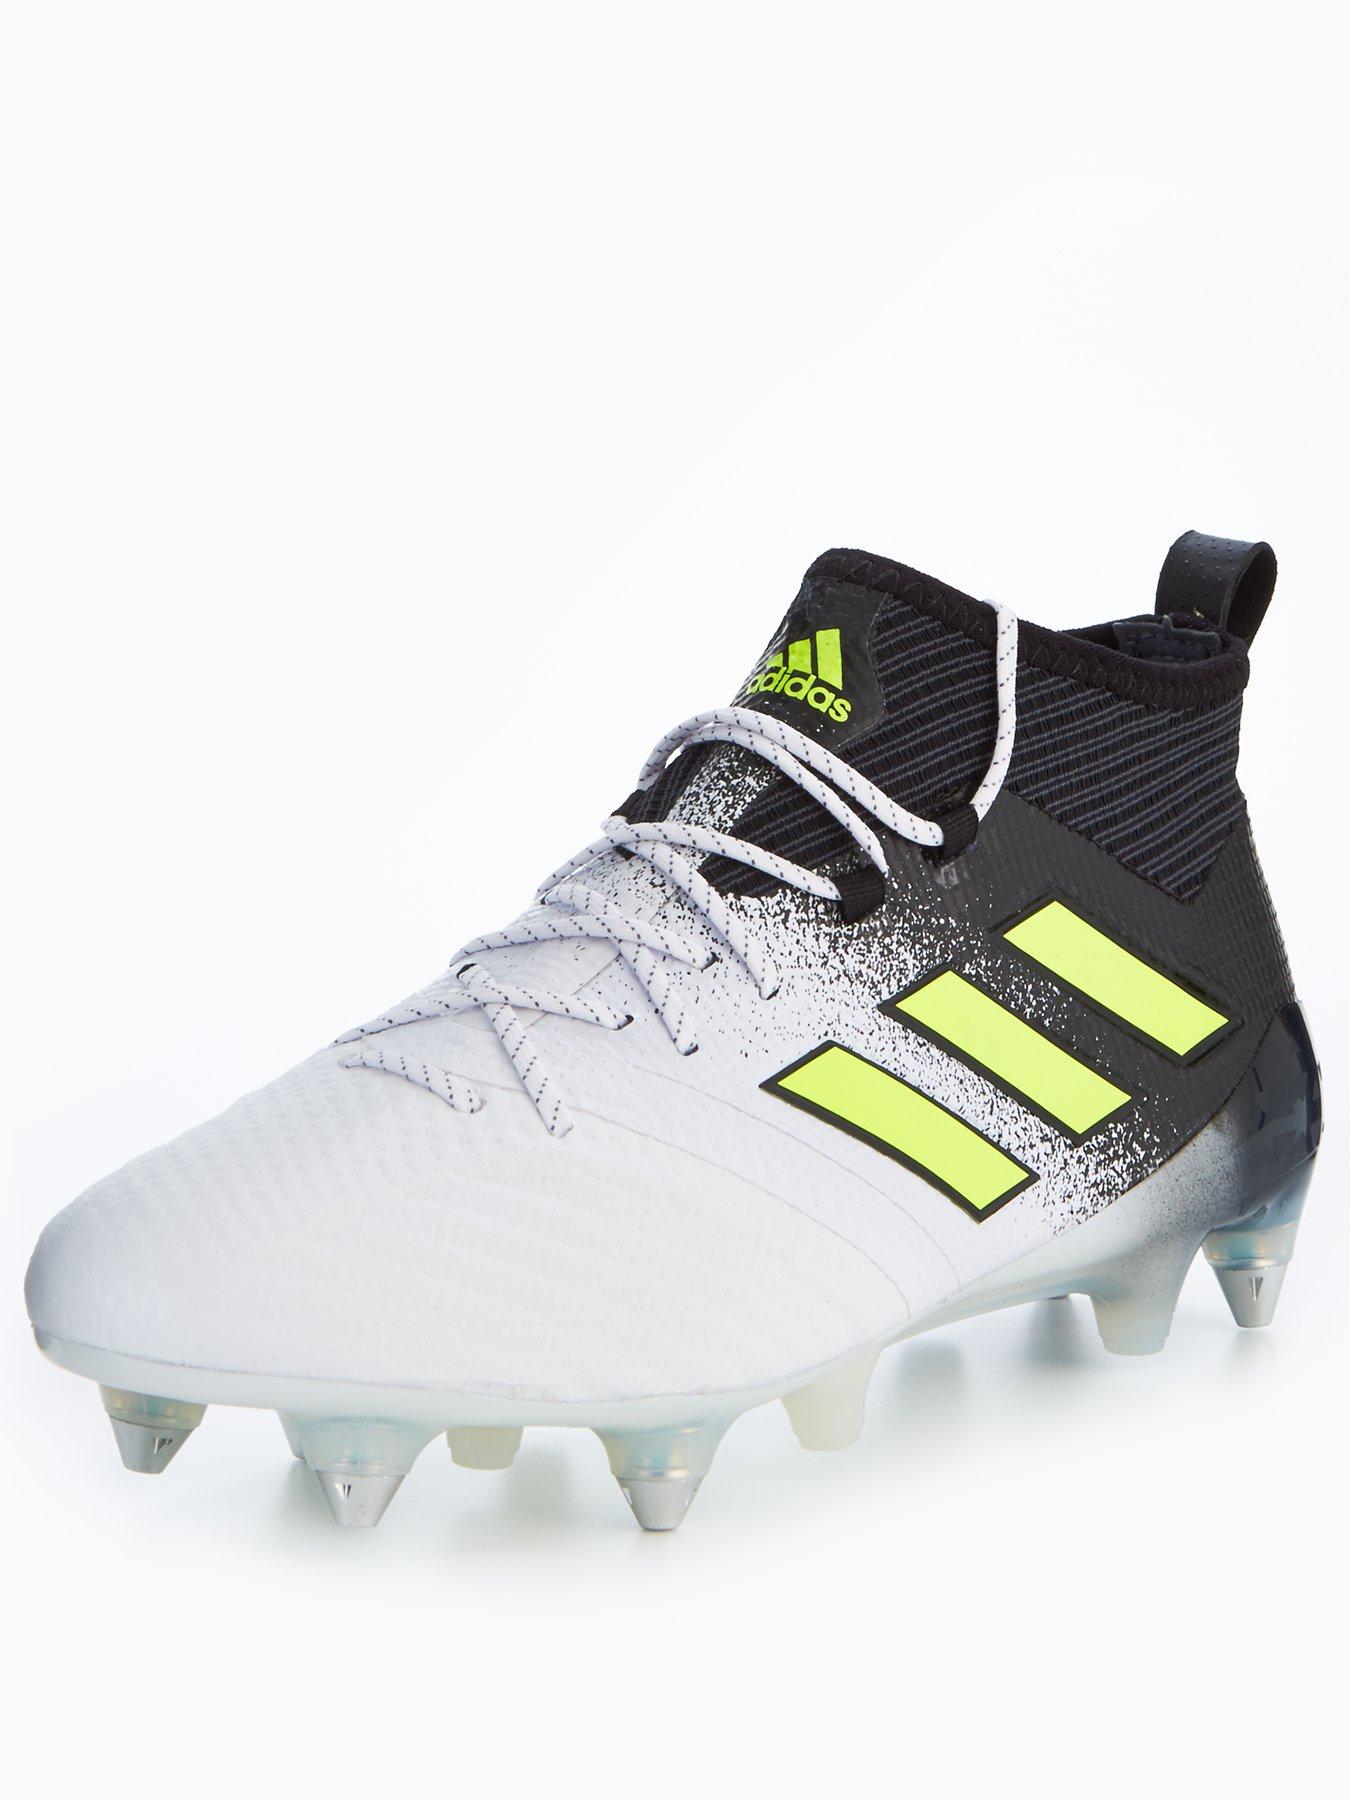 adidas ace 17.1 dust storm leather